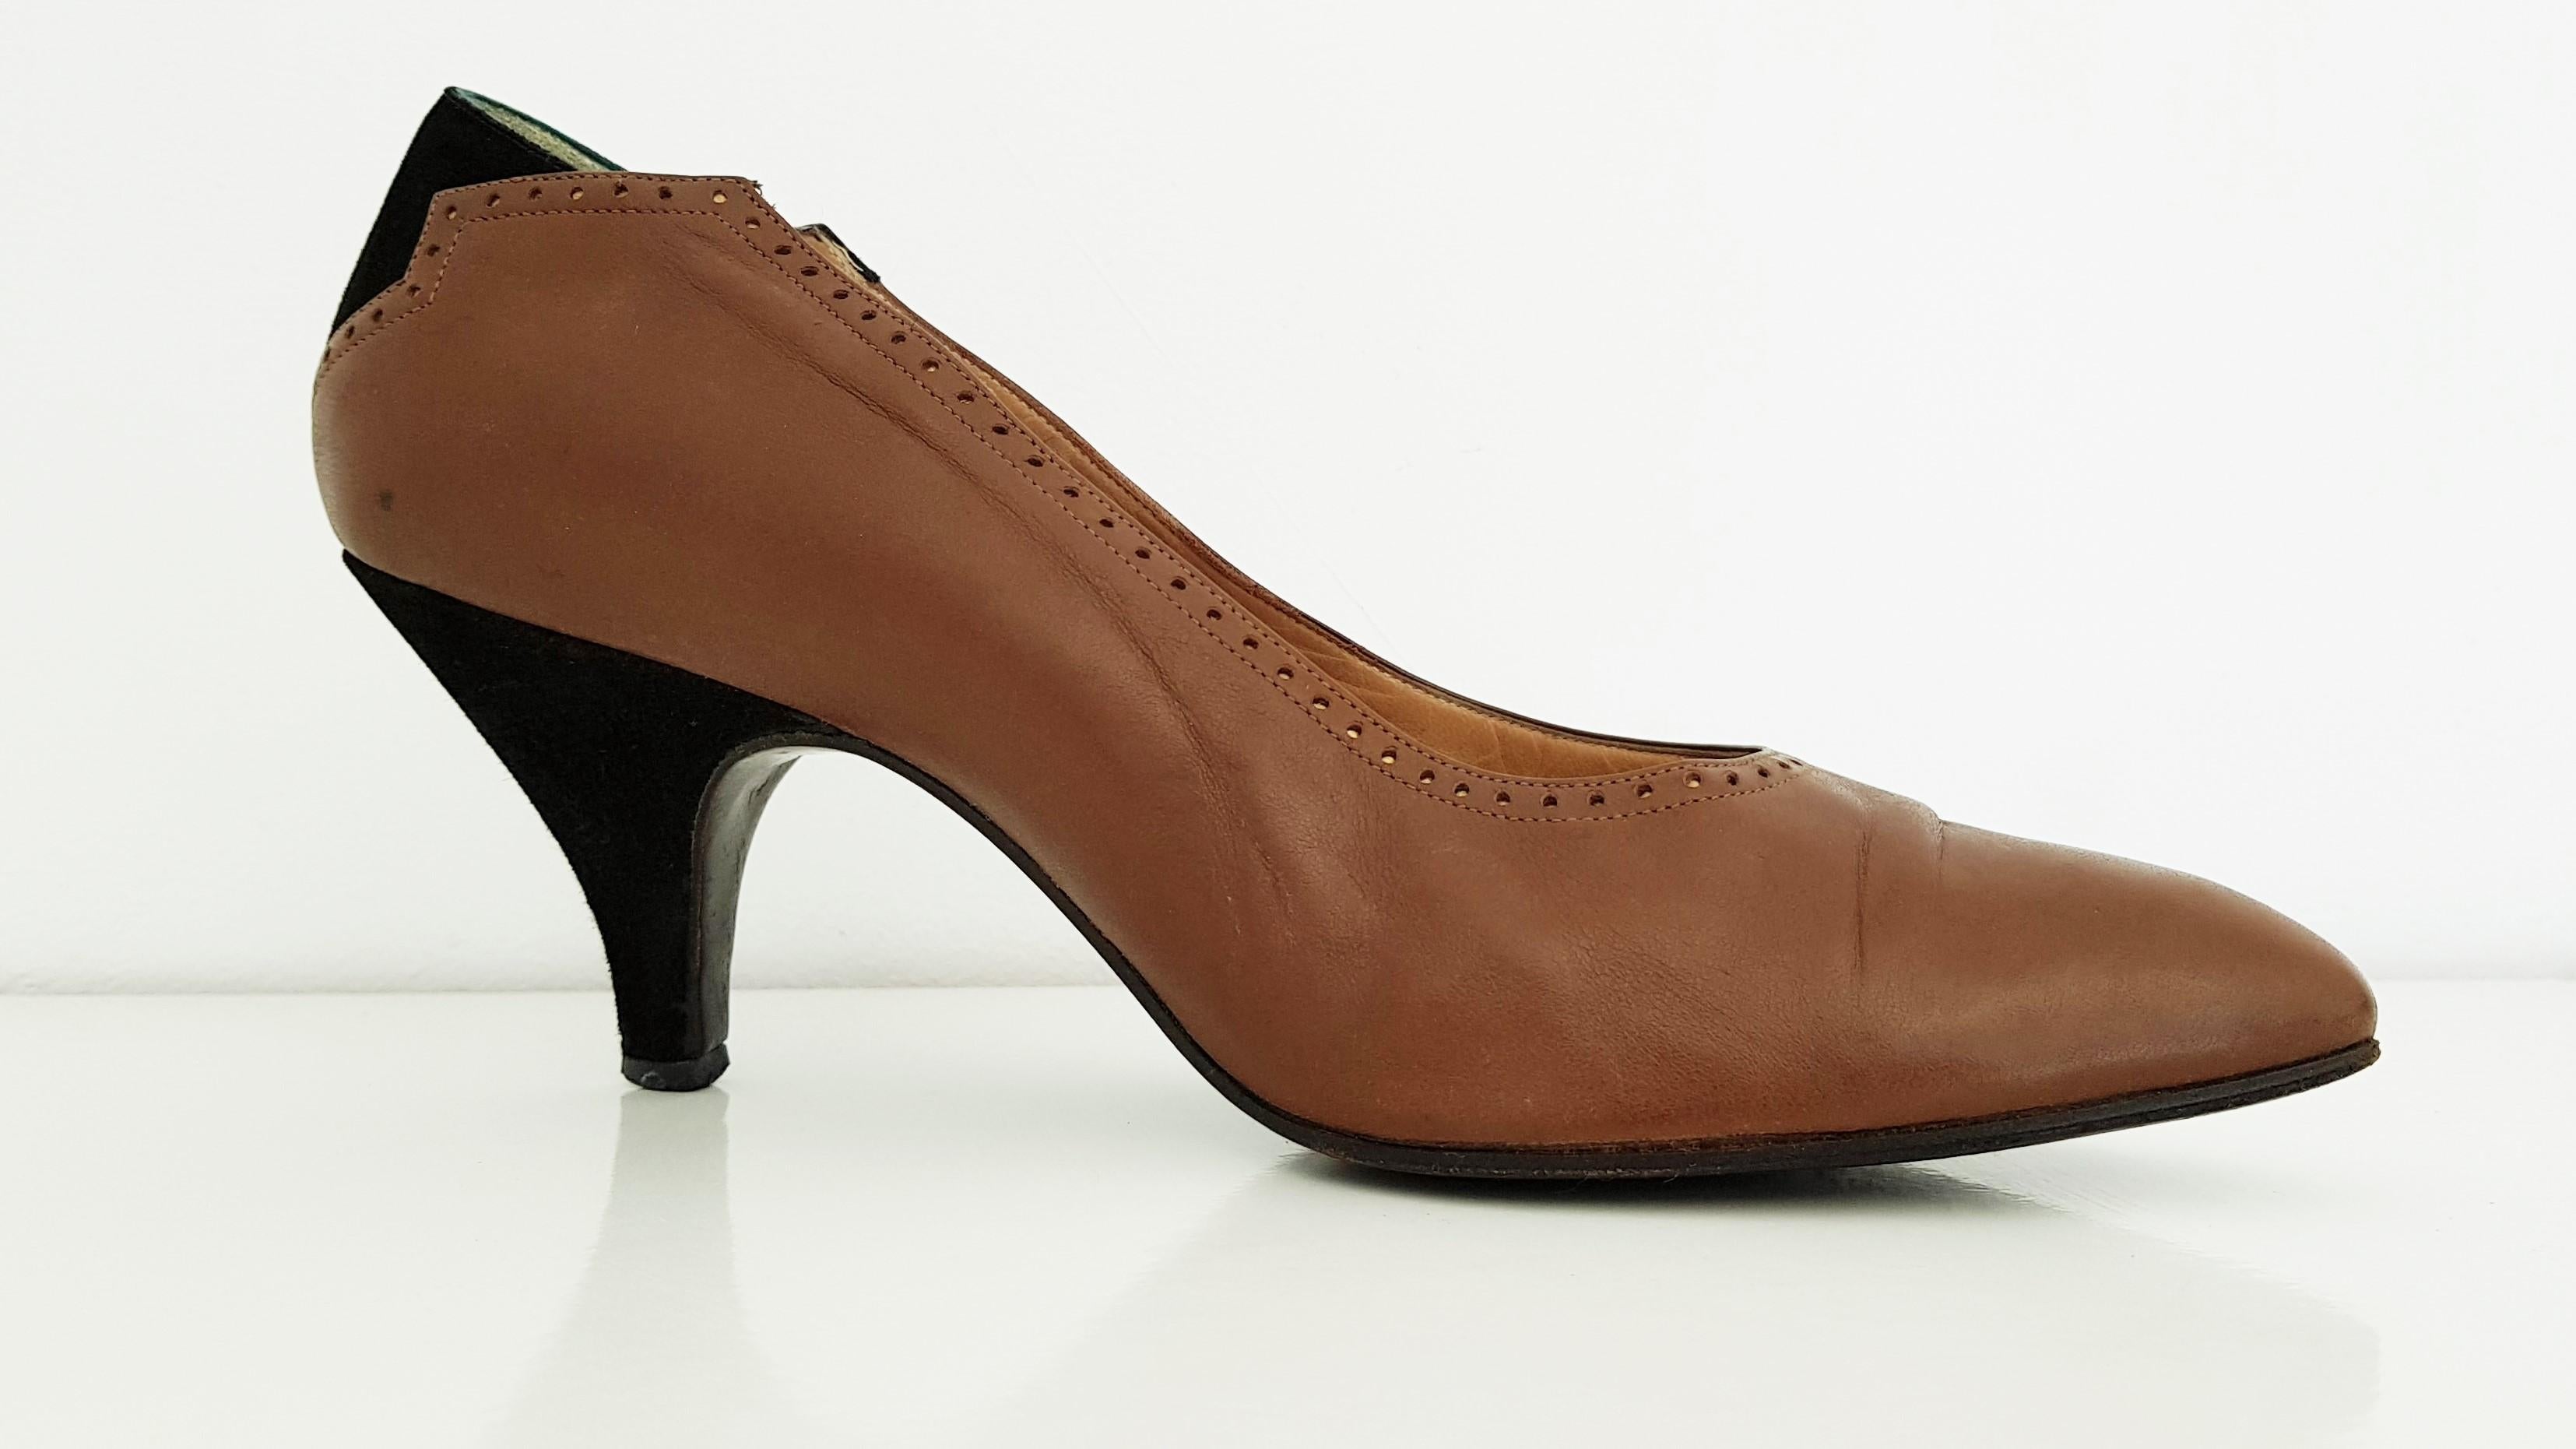 Maud Frizon Black Velvet and Brown Leather Heels - Size 39 1/2 (EU) For Sale 1